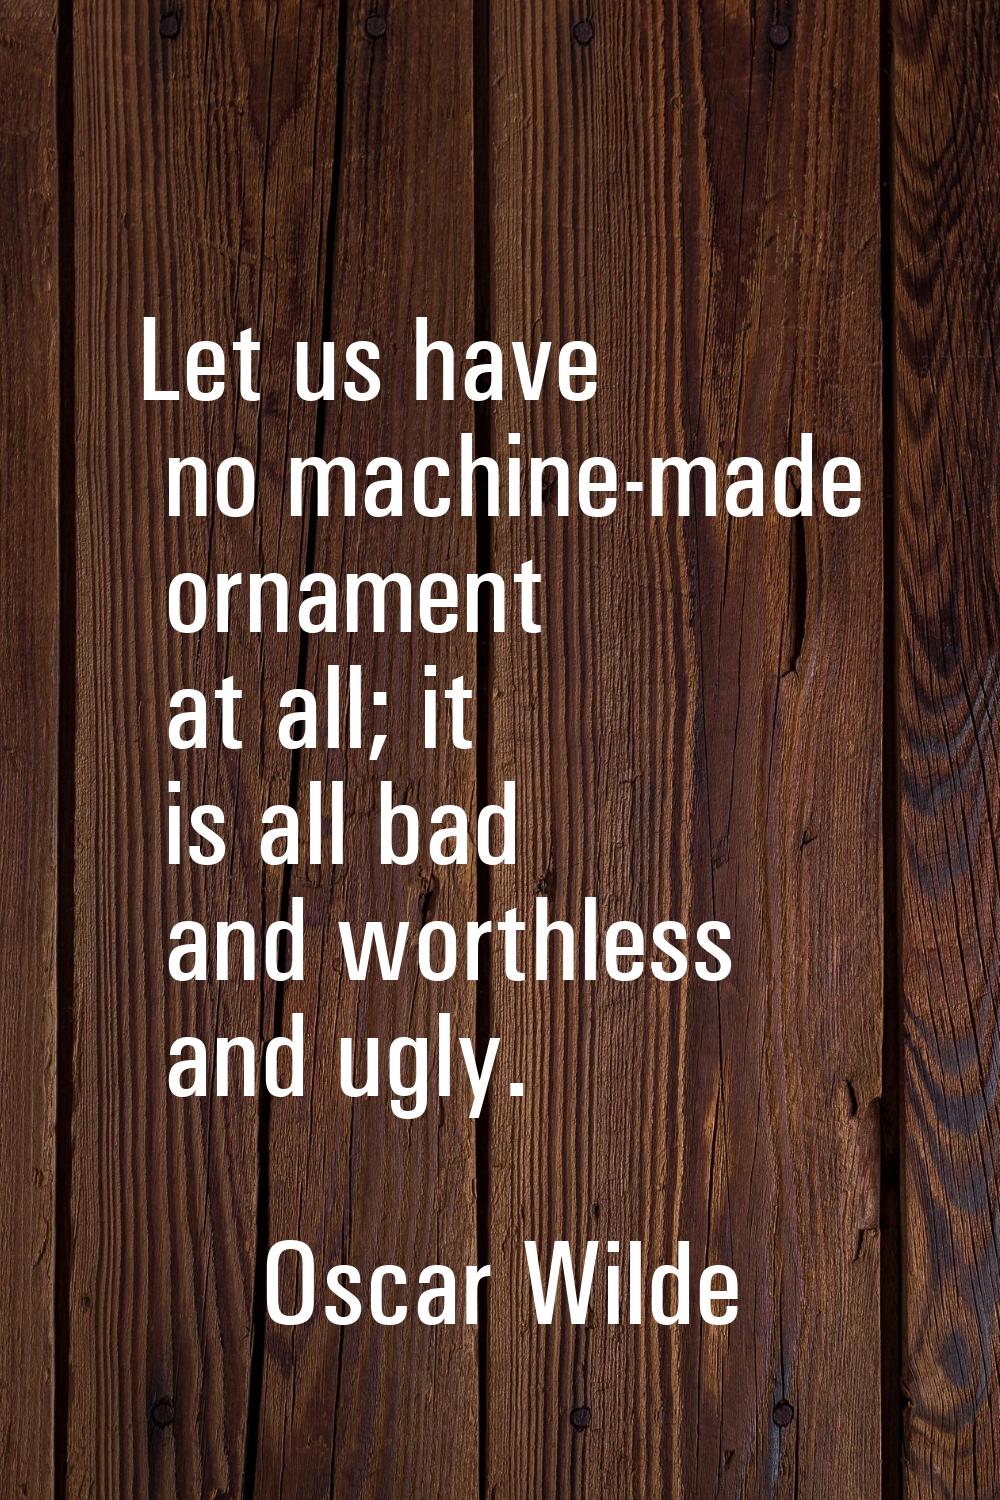 Let us have no machine-made ornament at all; it is all bad and worthless and ugly.